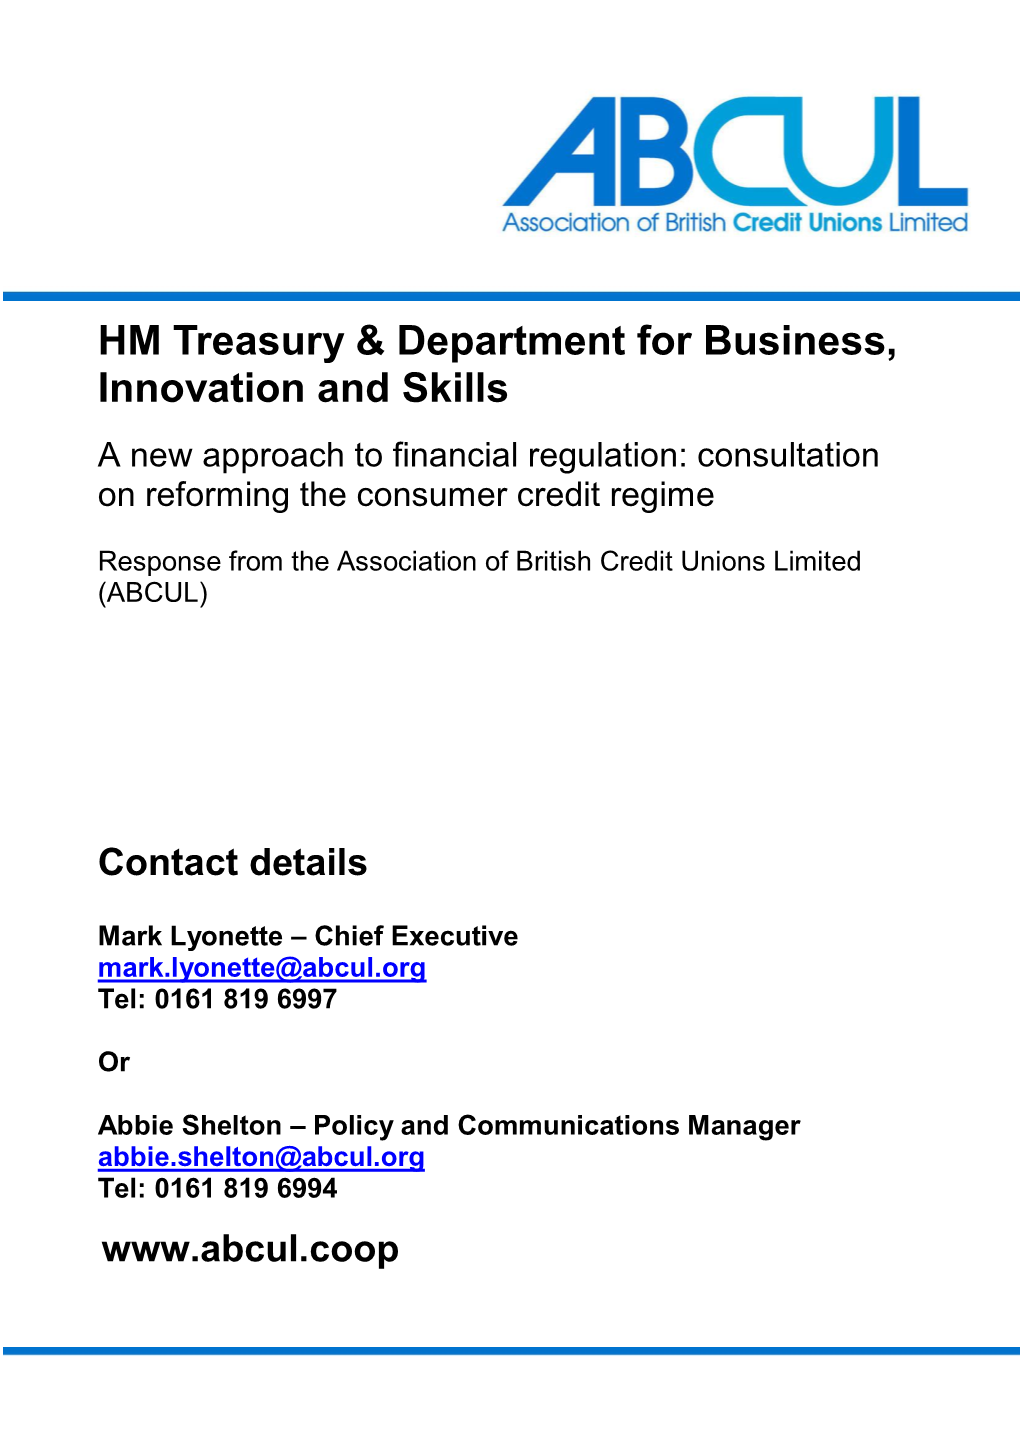 HM Treasury & Department for Business, Innovation and Skills